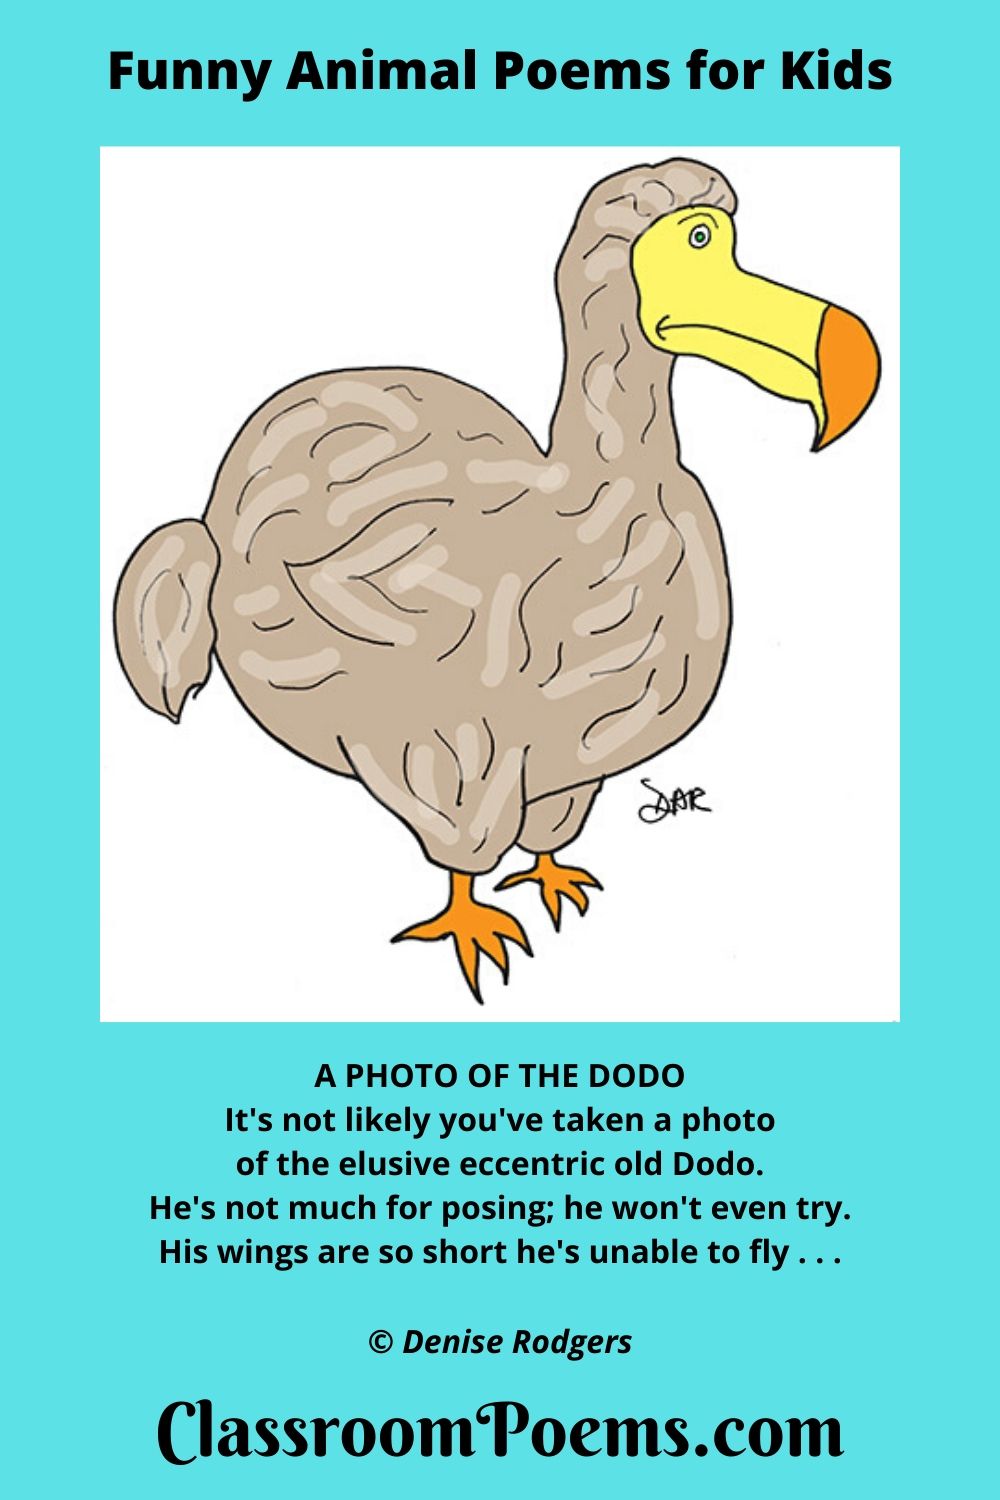 Dodo bird. A Photo of the Dodo, a funny animal poem for kids by Denise Rodgers on ClassroomPoems.com.